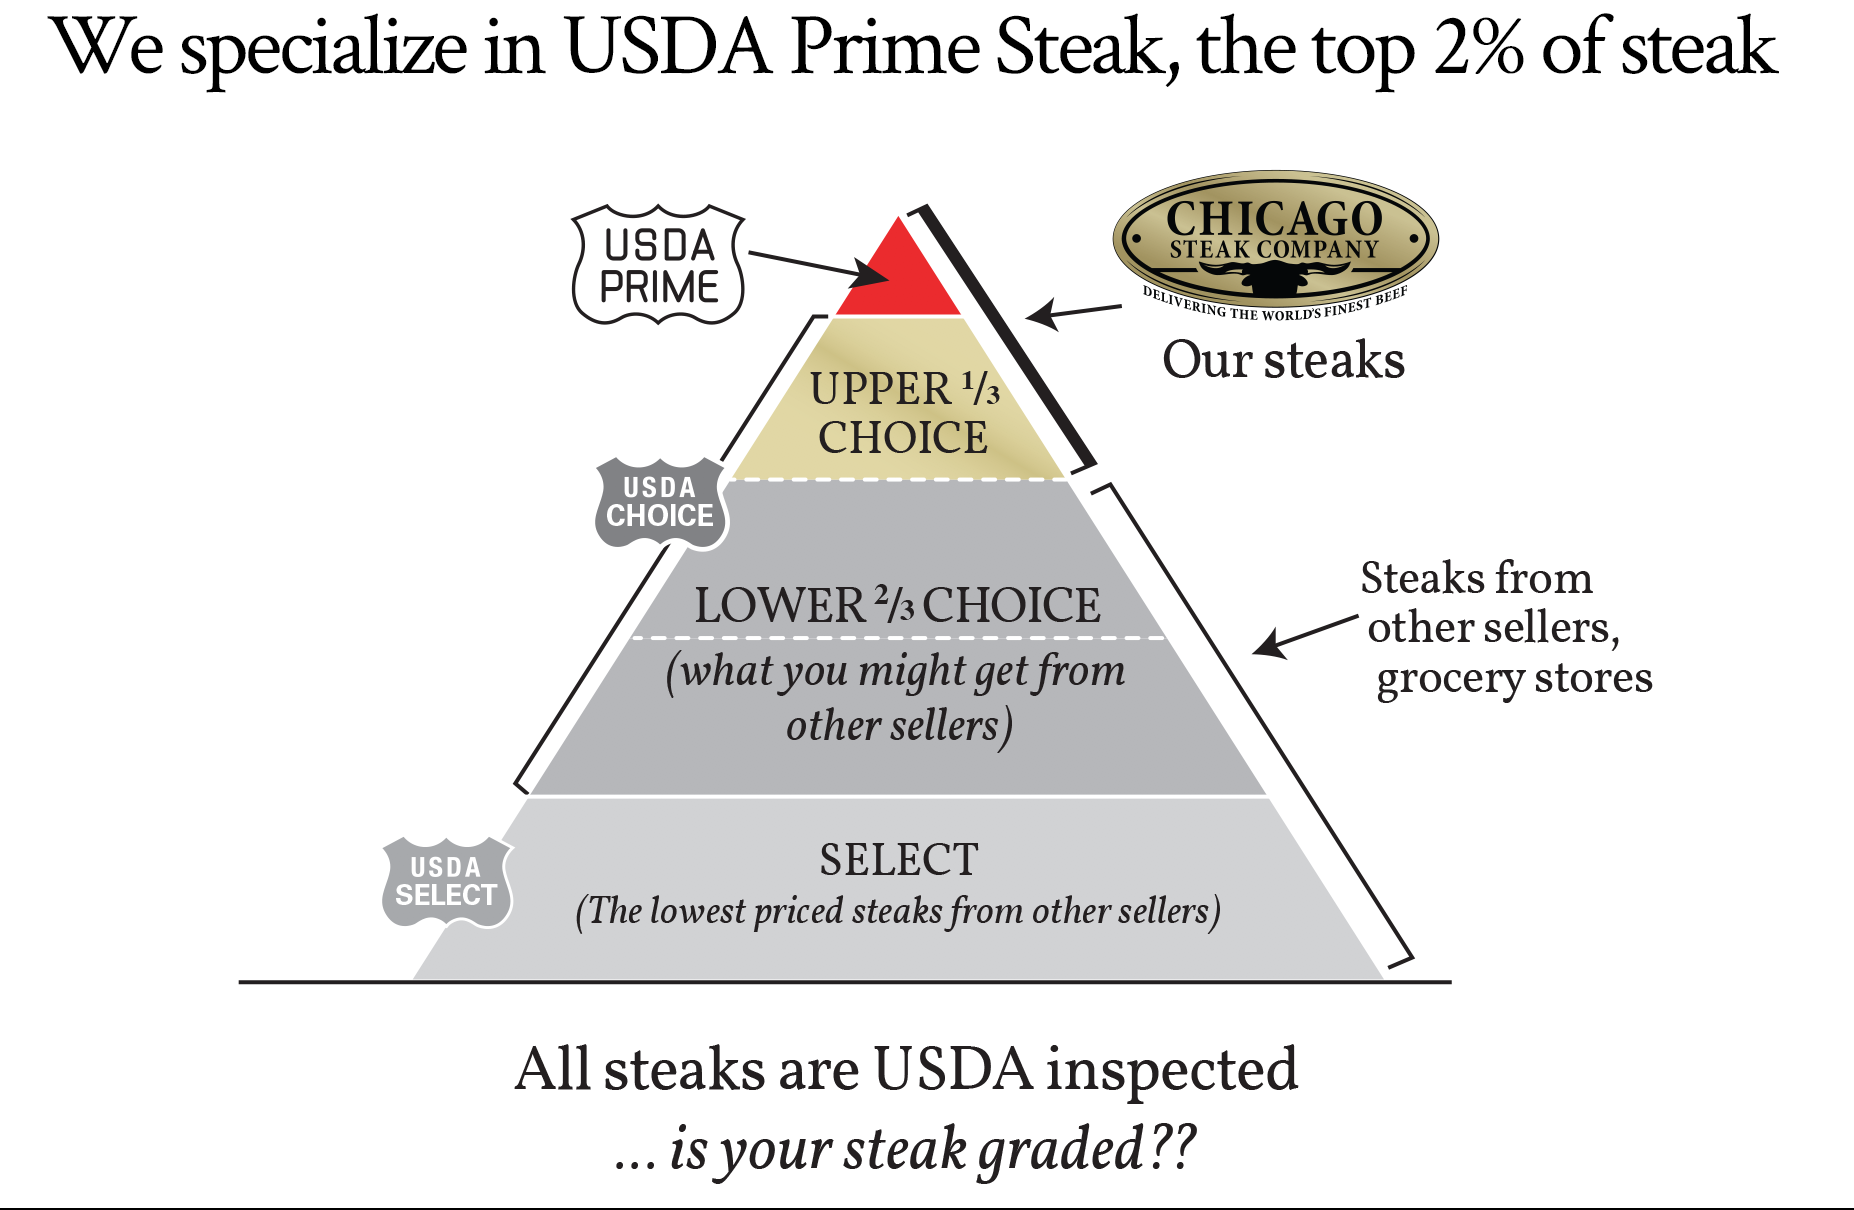 All steaks are USDA inspected...but is your steak GRADED? Chicago Steak Company only sells the very best.